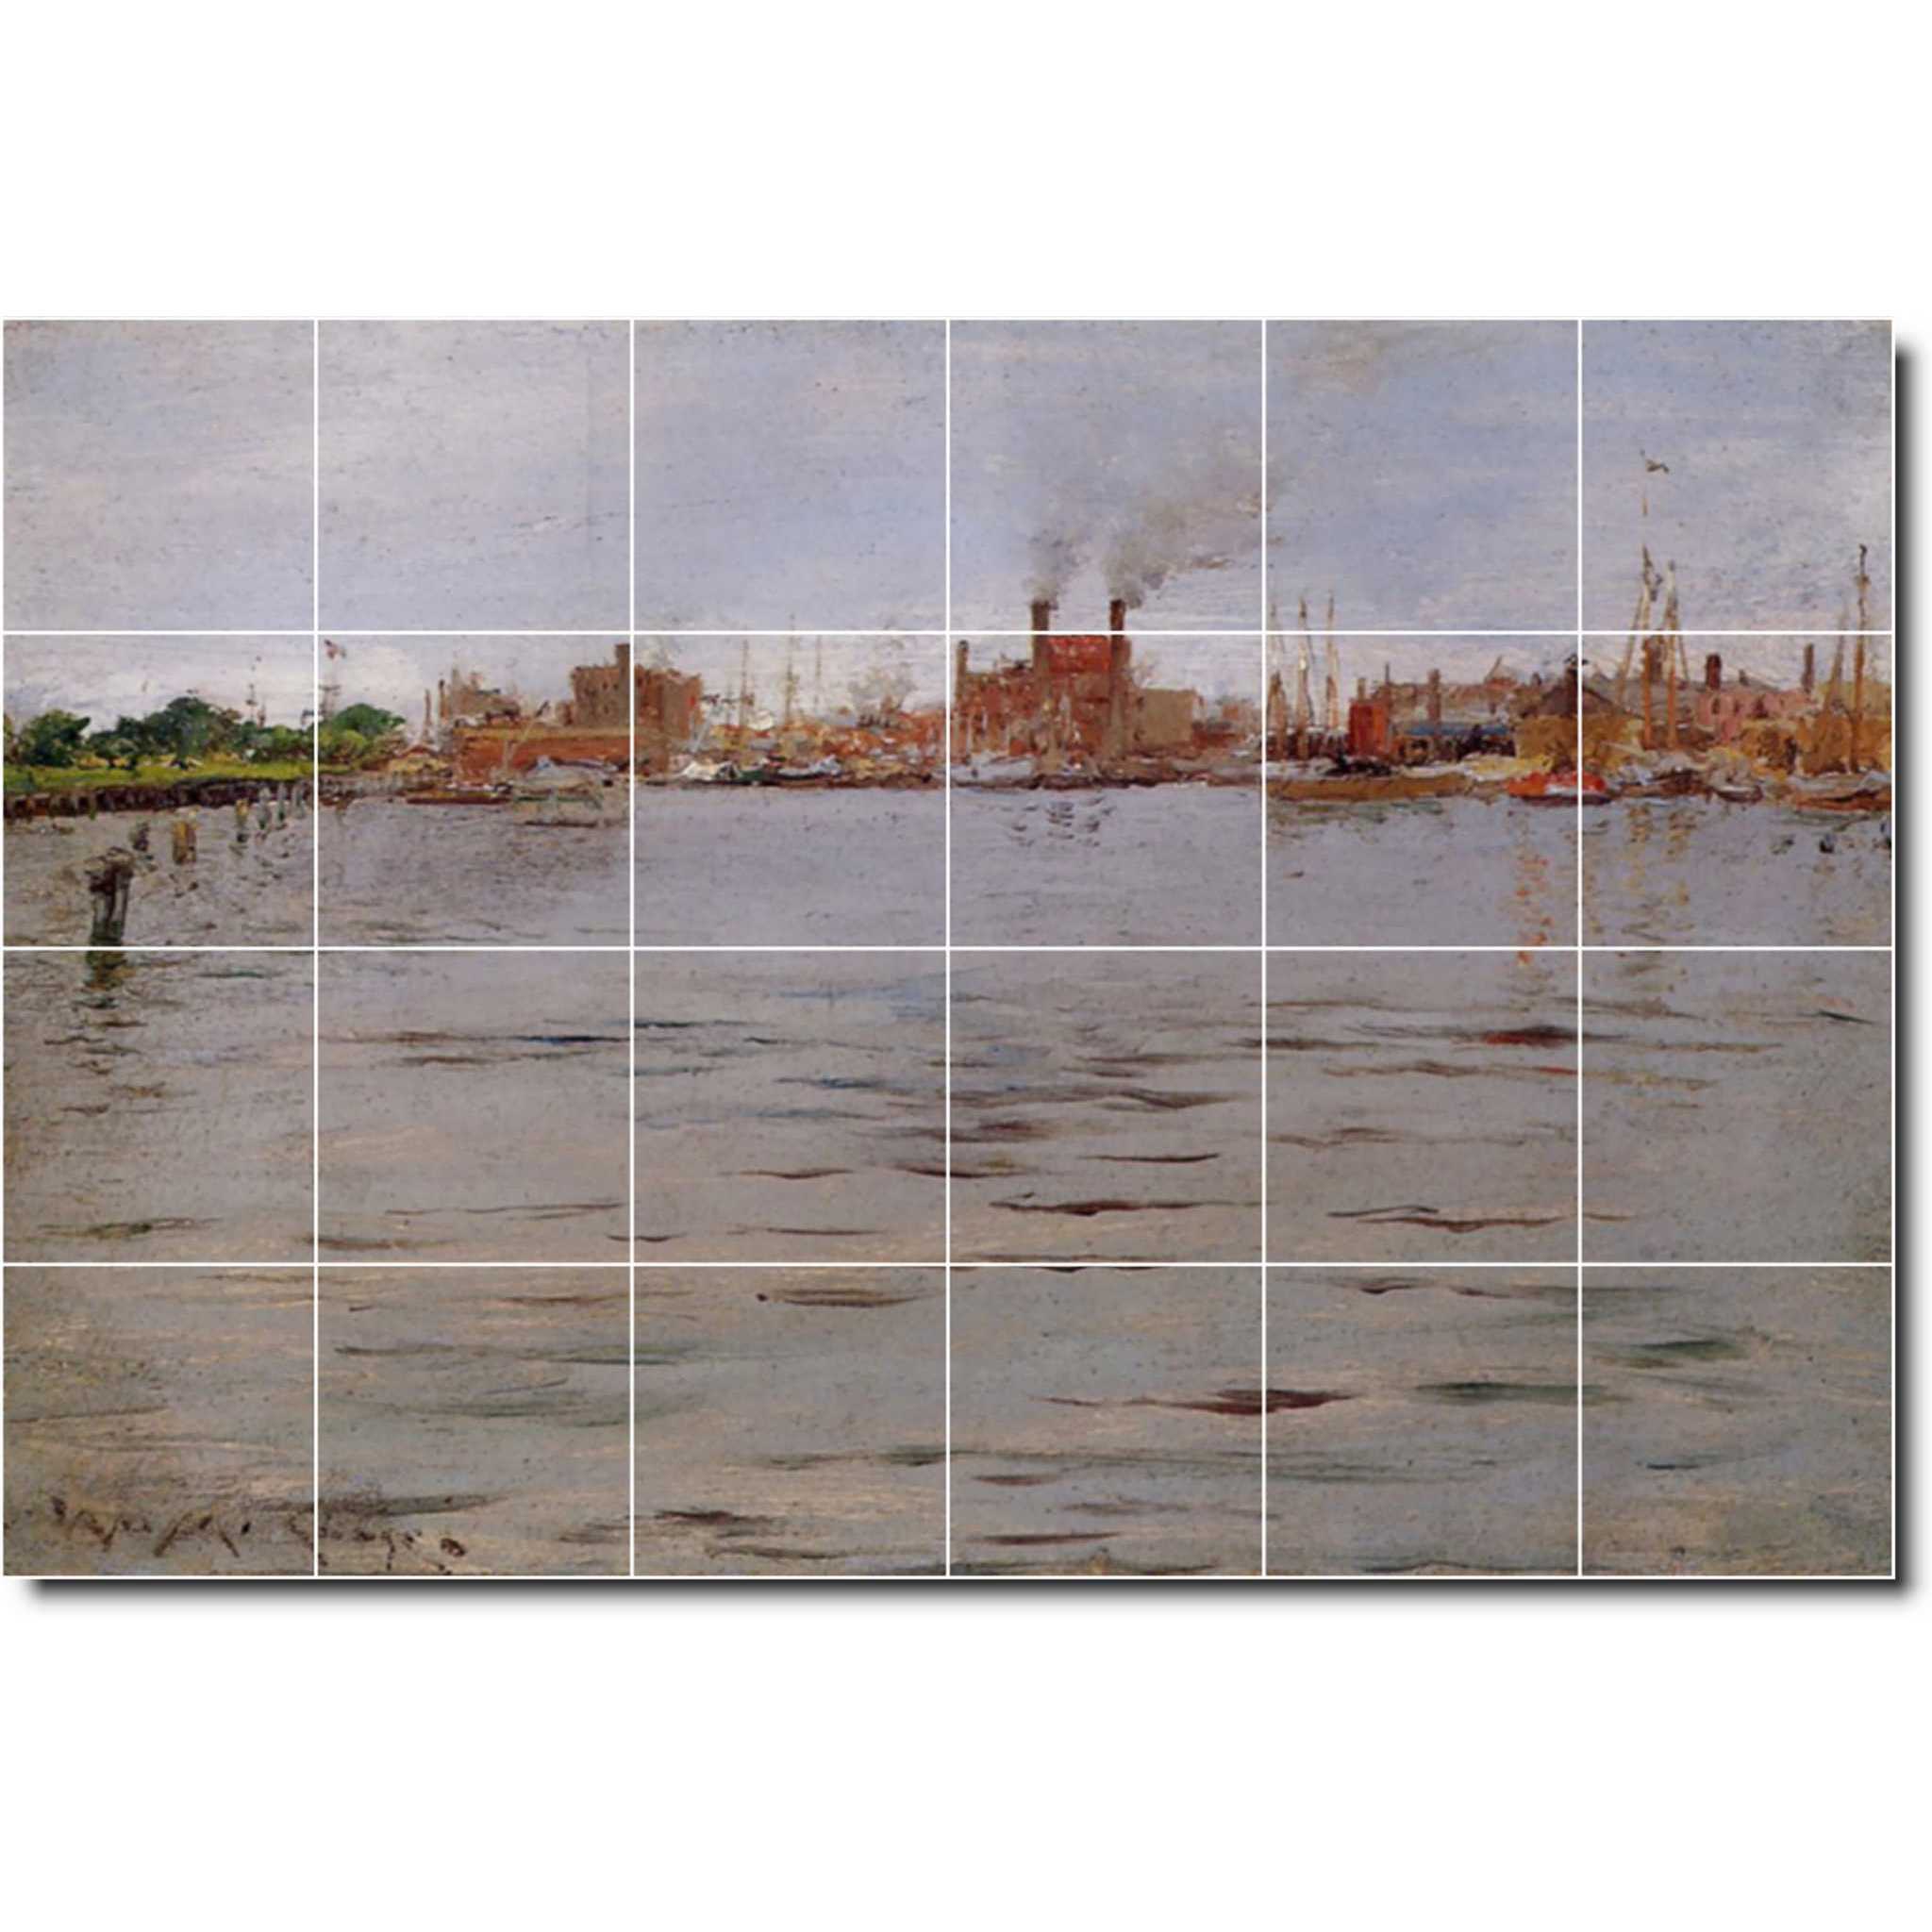 william chase waterfront painting ceramic tile mural p01531